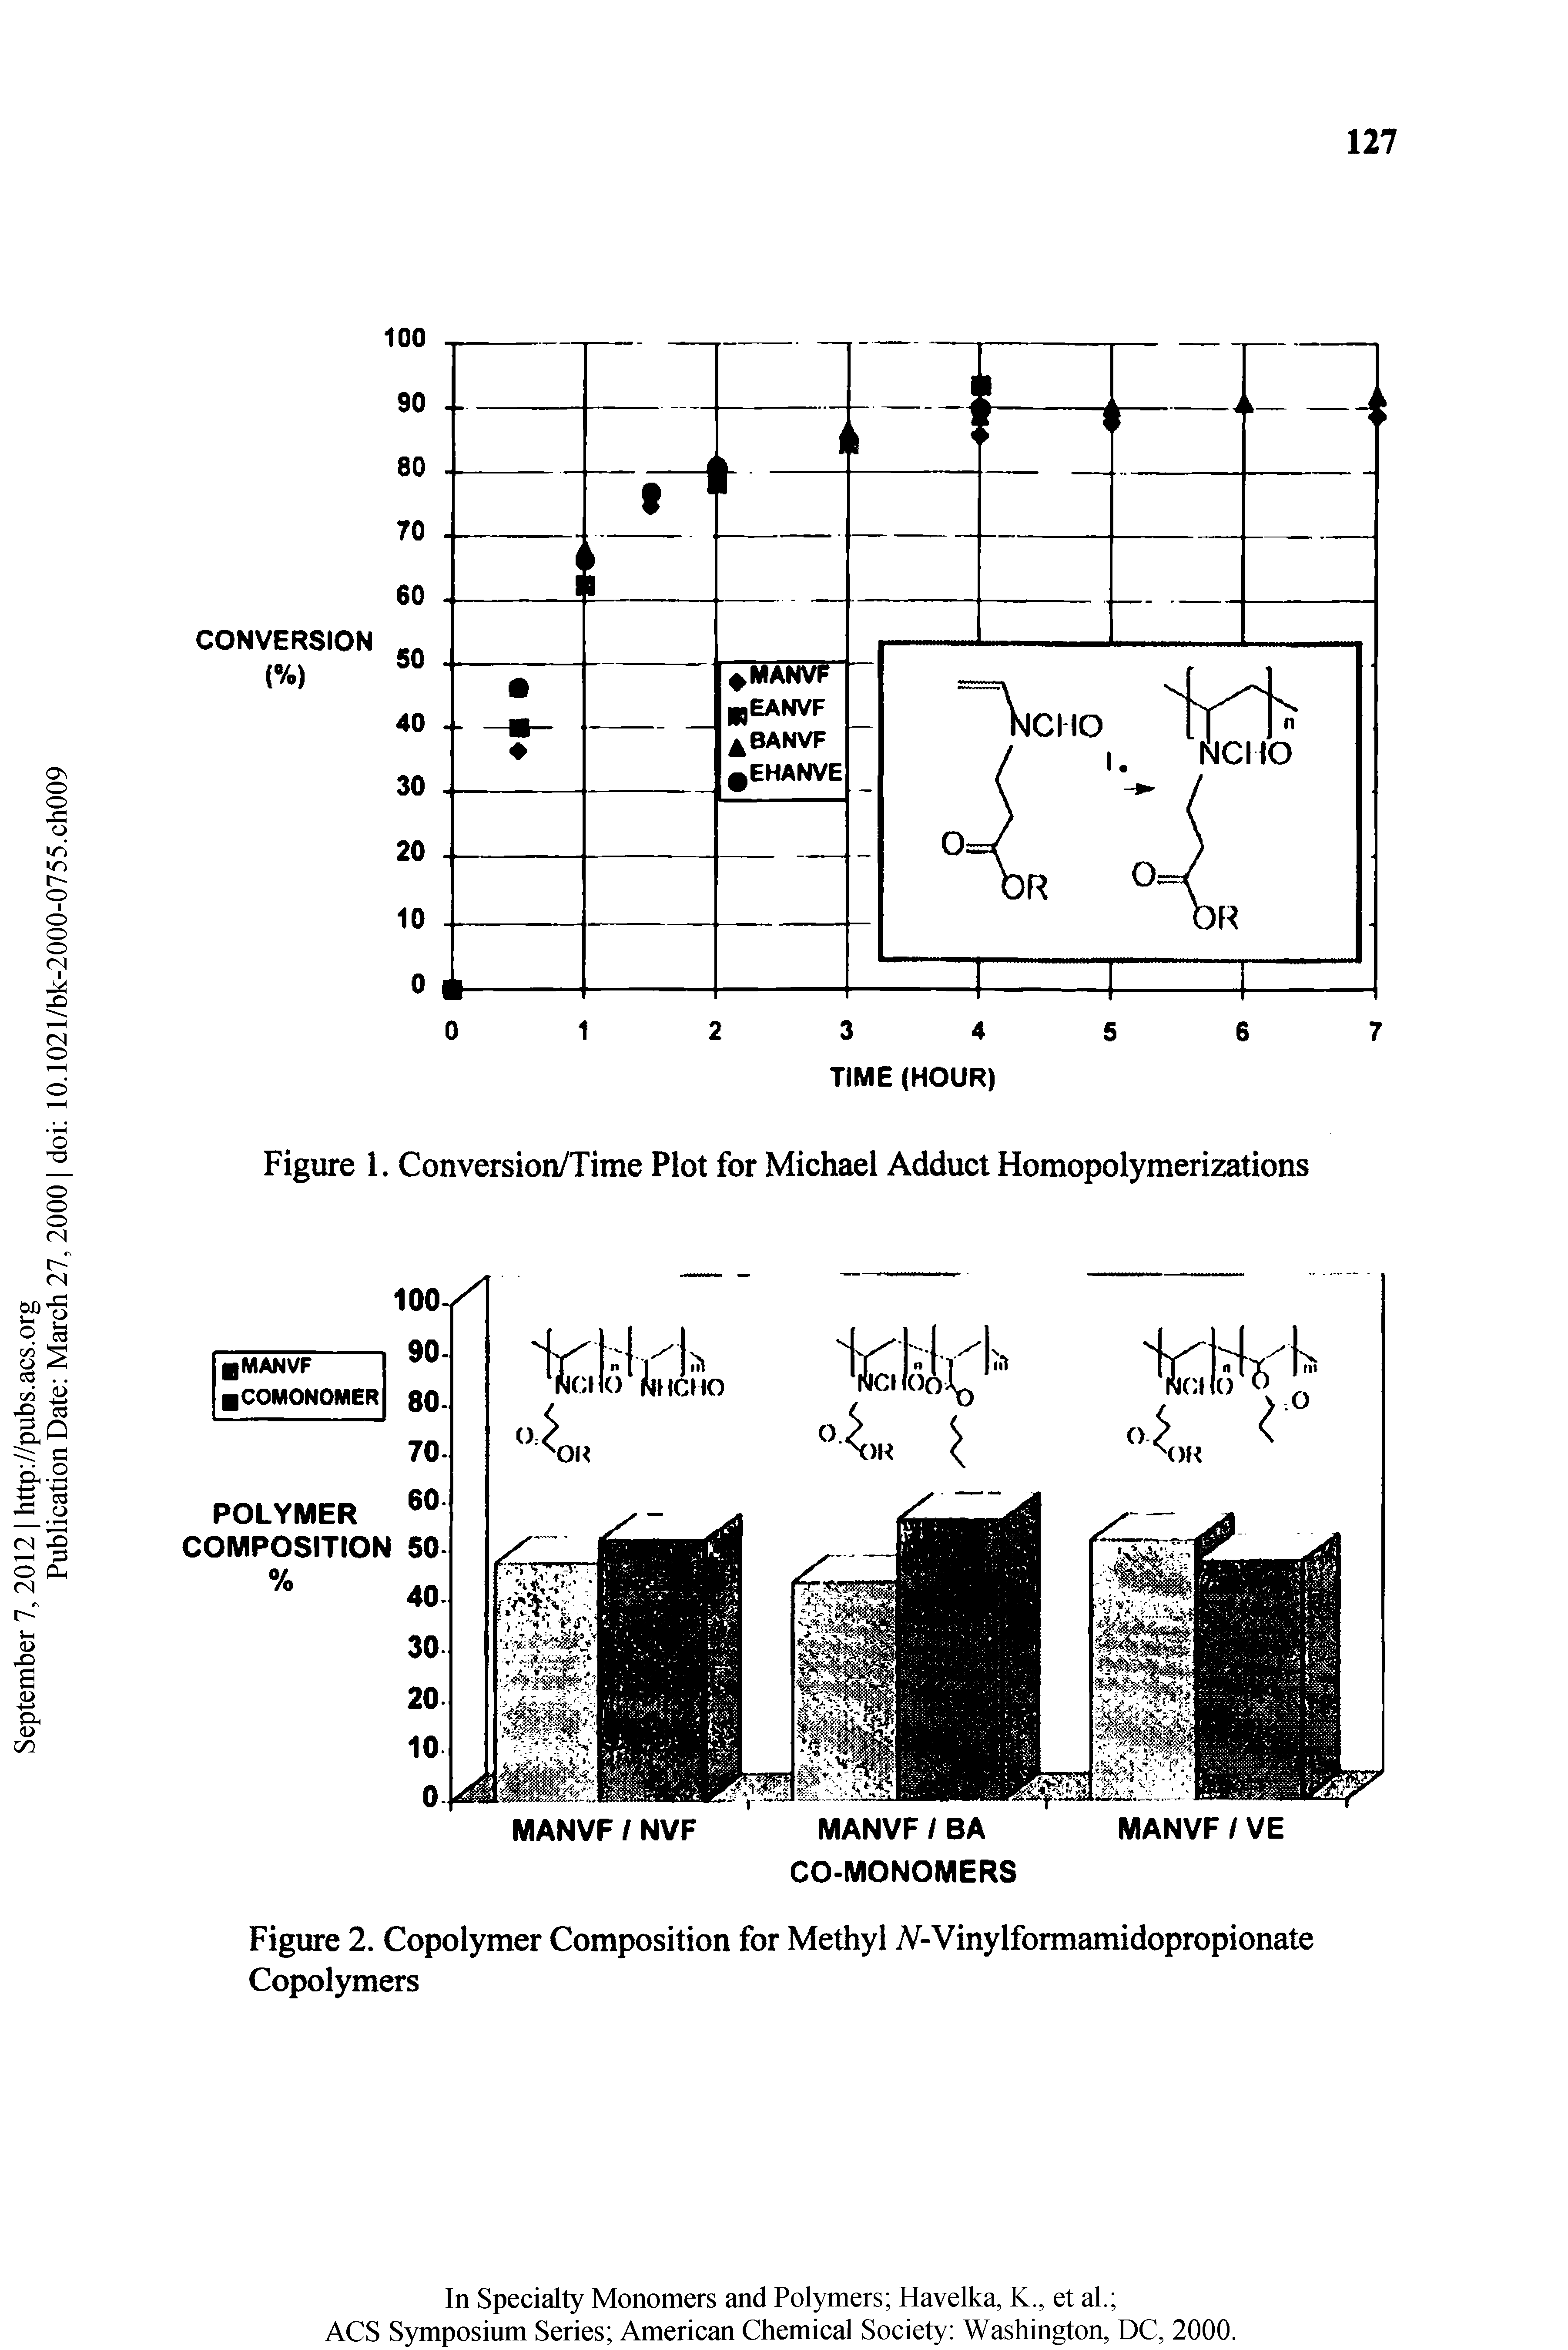 Figure 1. Conversion/Time Plot for Michael Adduct Homopolymerizations...